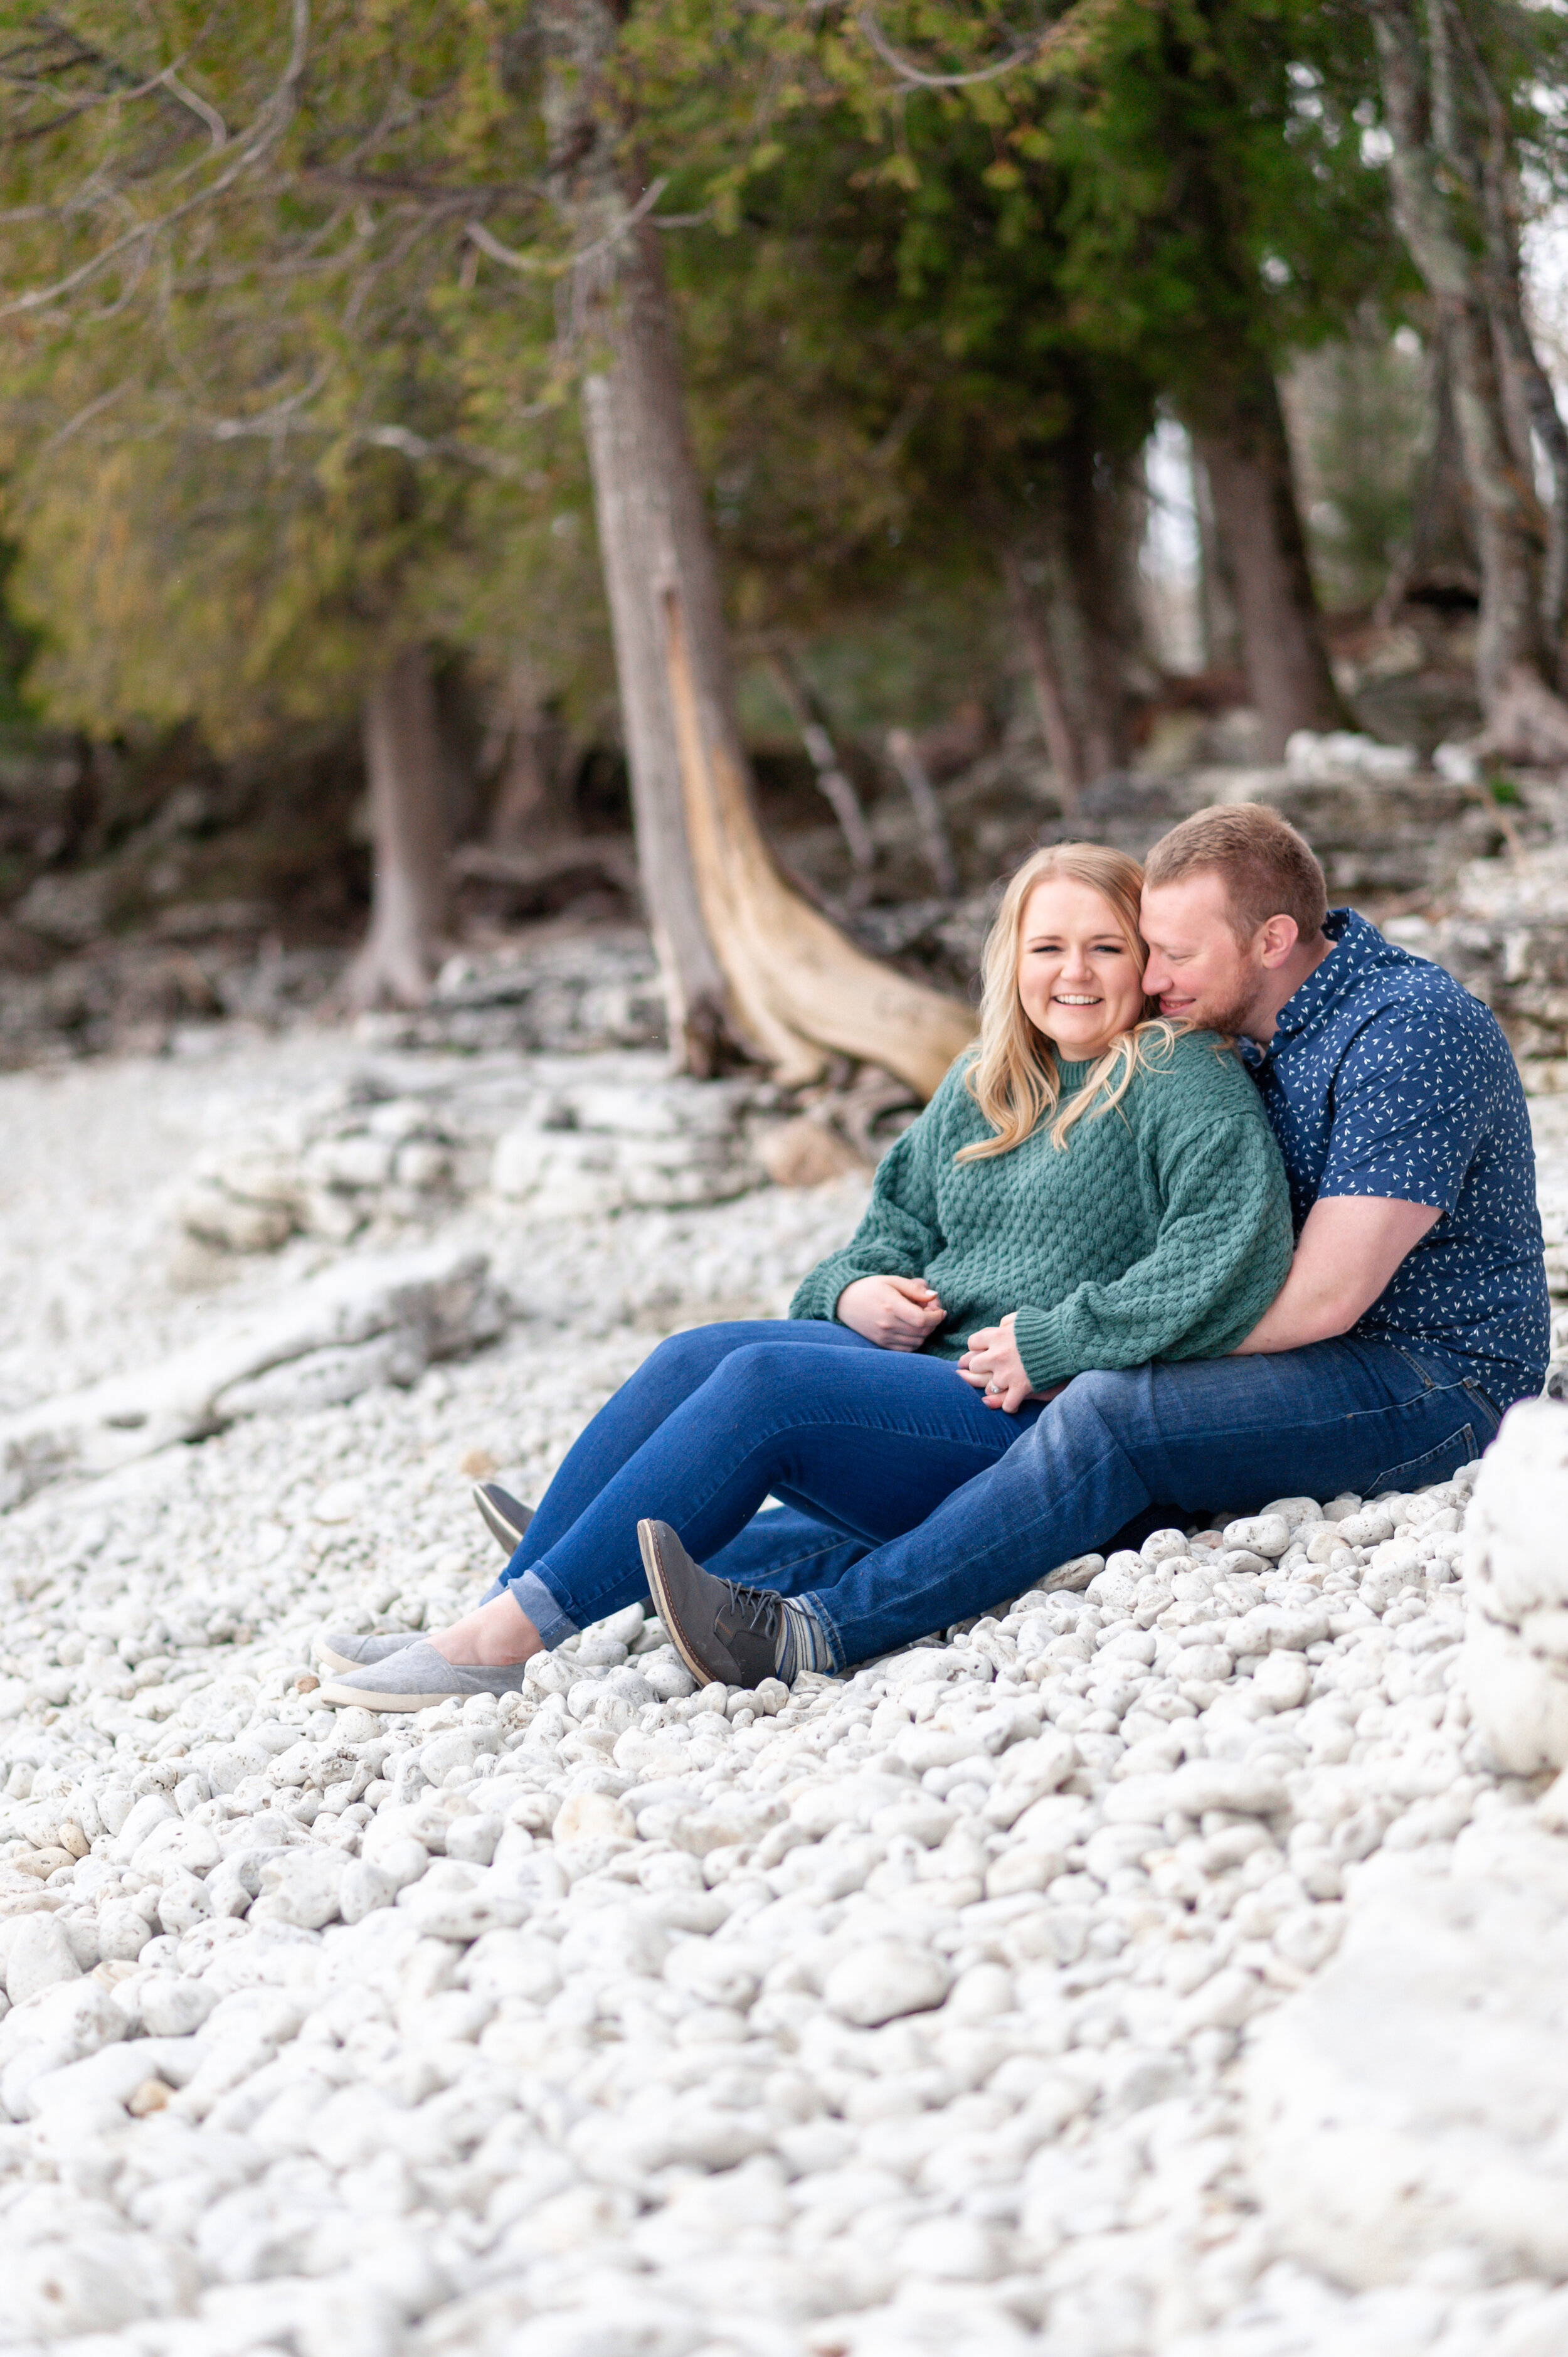 Couple engagement session on woods white pebble beach